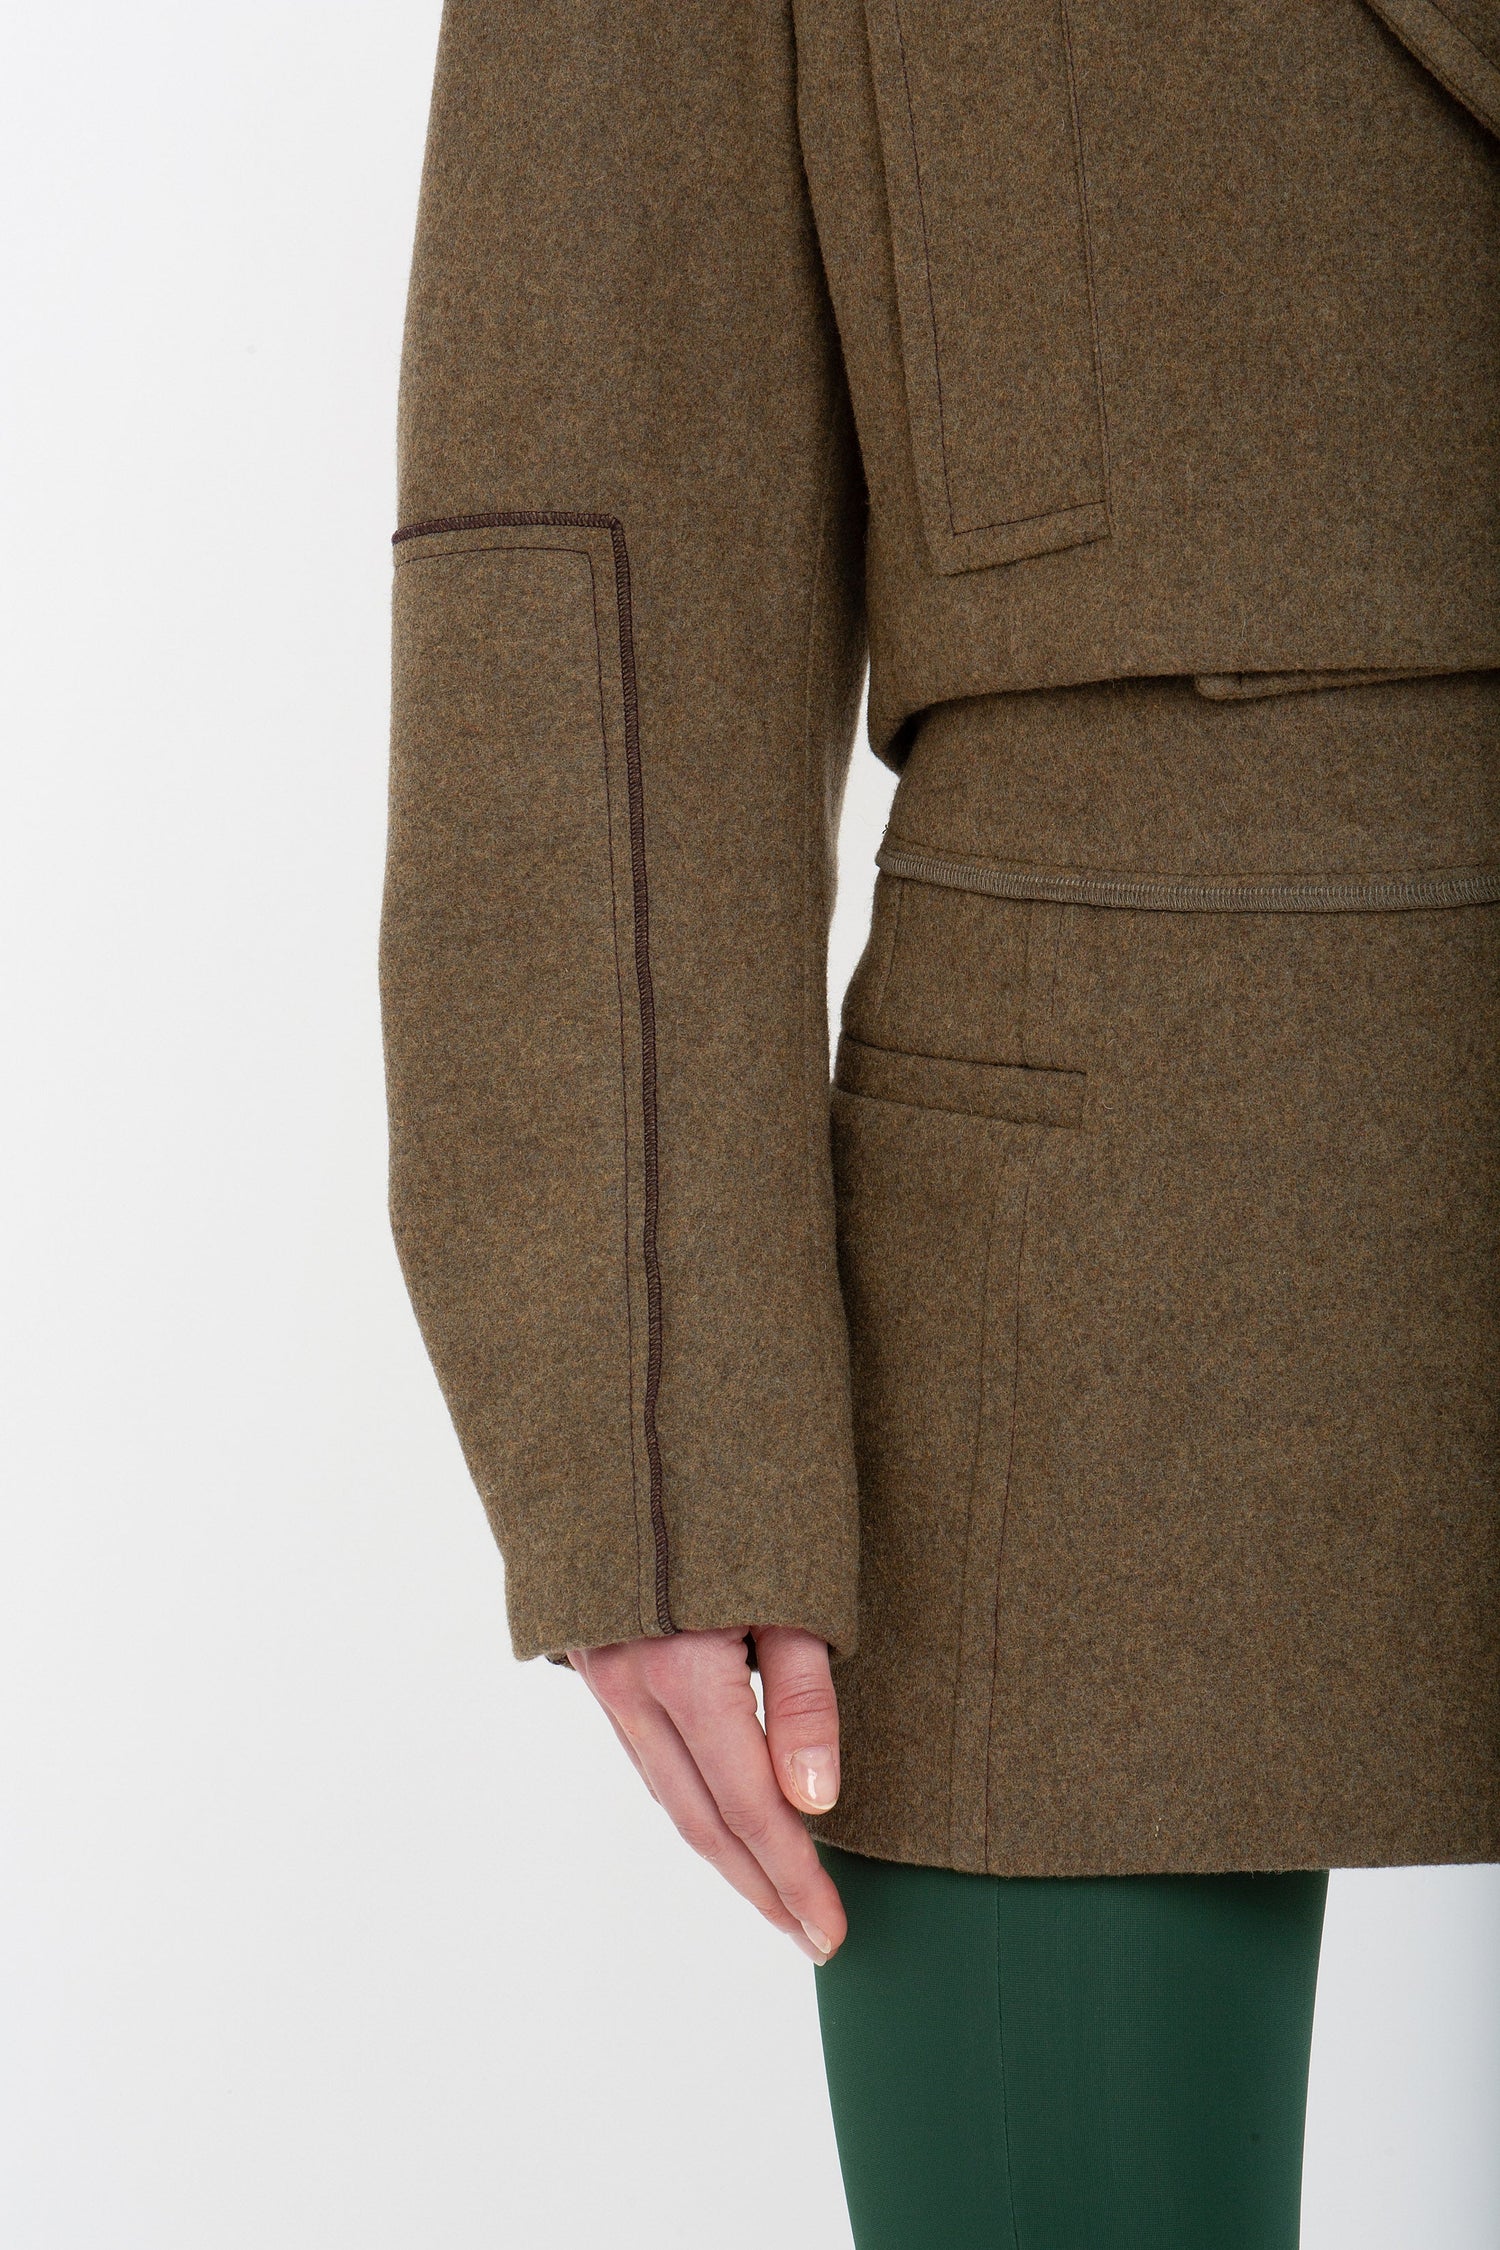 Close-up view of a person wearing a waist-defining, brown, long-sleeve Cropped Pea Coat In Khaki by Victoria Beckham with a pocket, showcasing their right arm and hand against a white background.